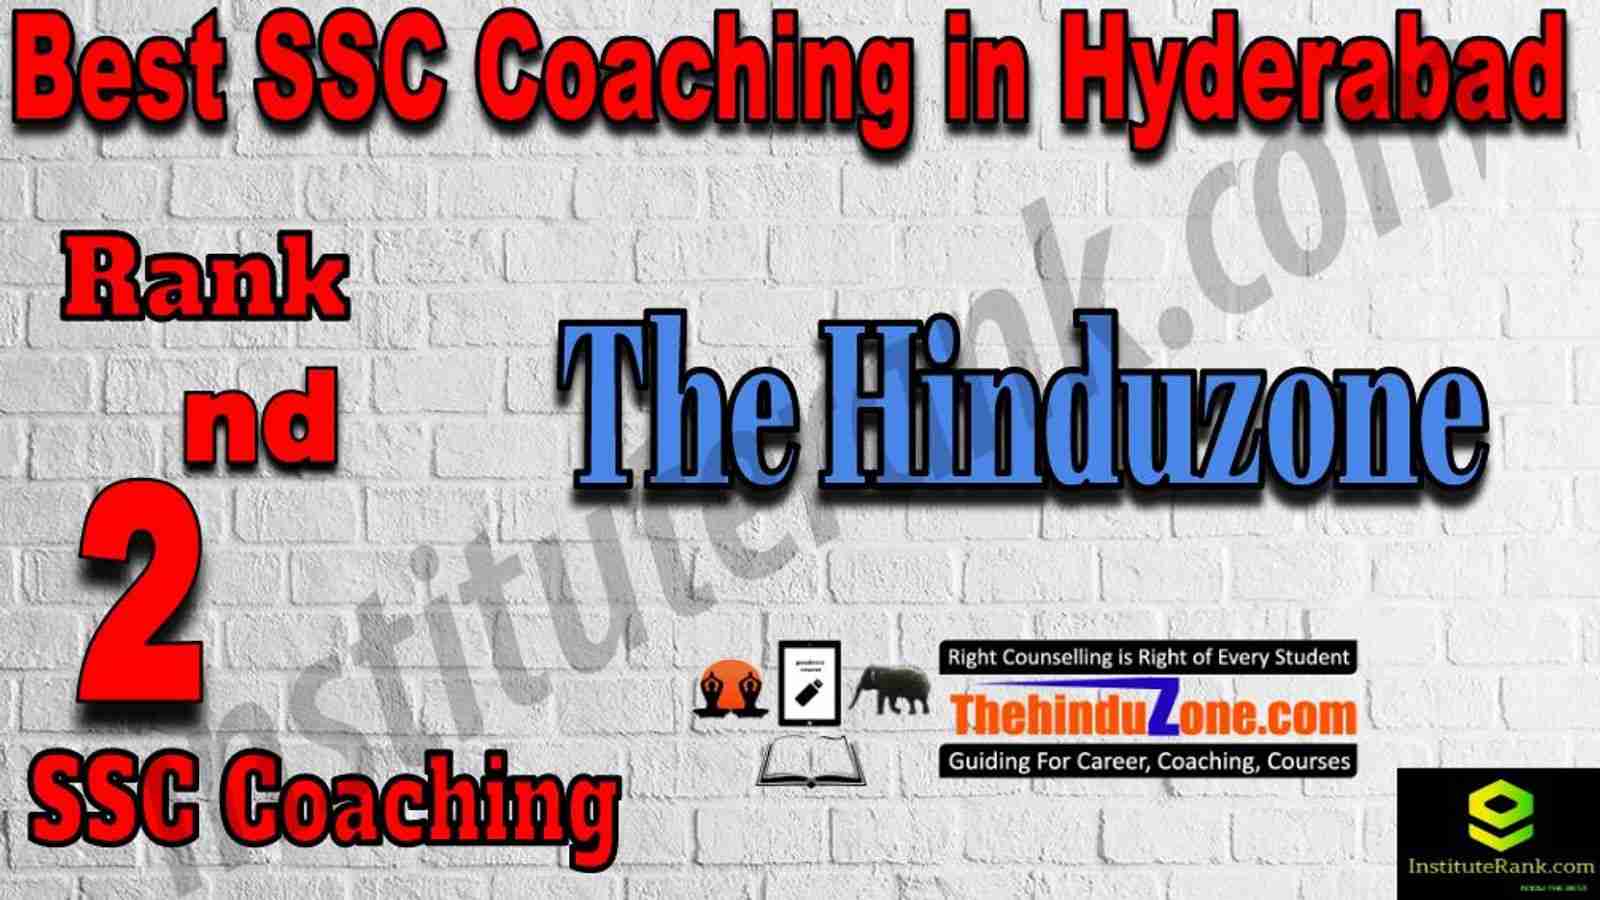 2nd Best SSC Coaching in Hyderabad